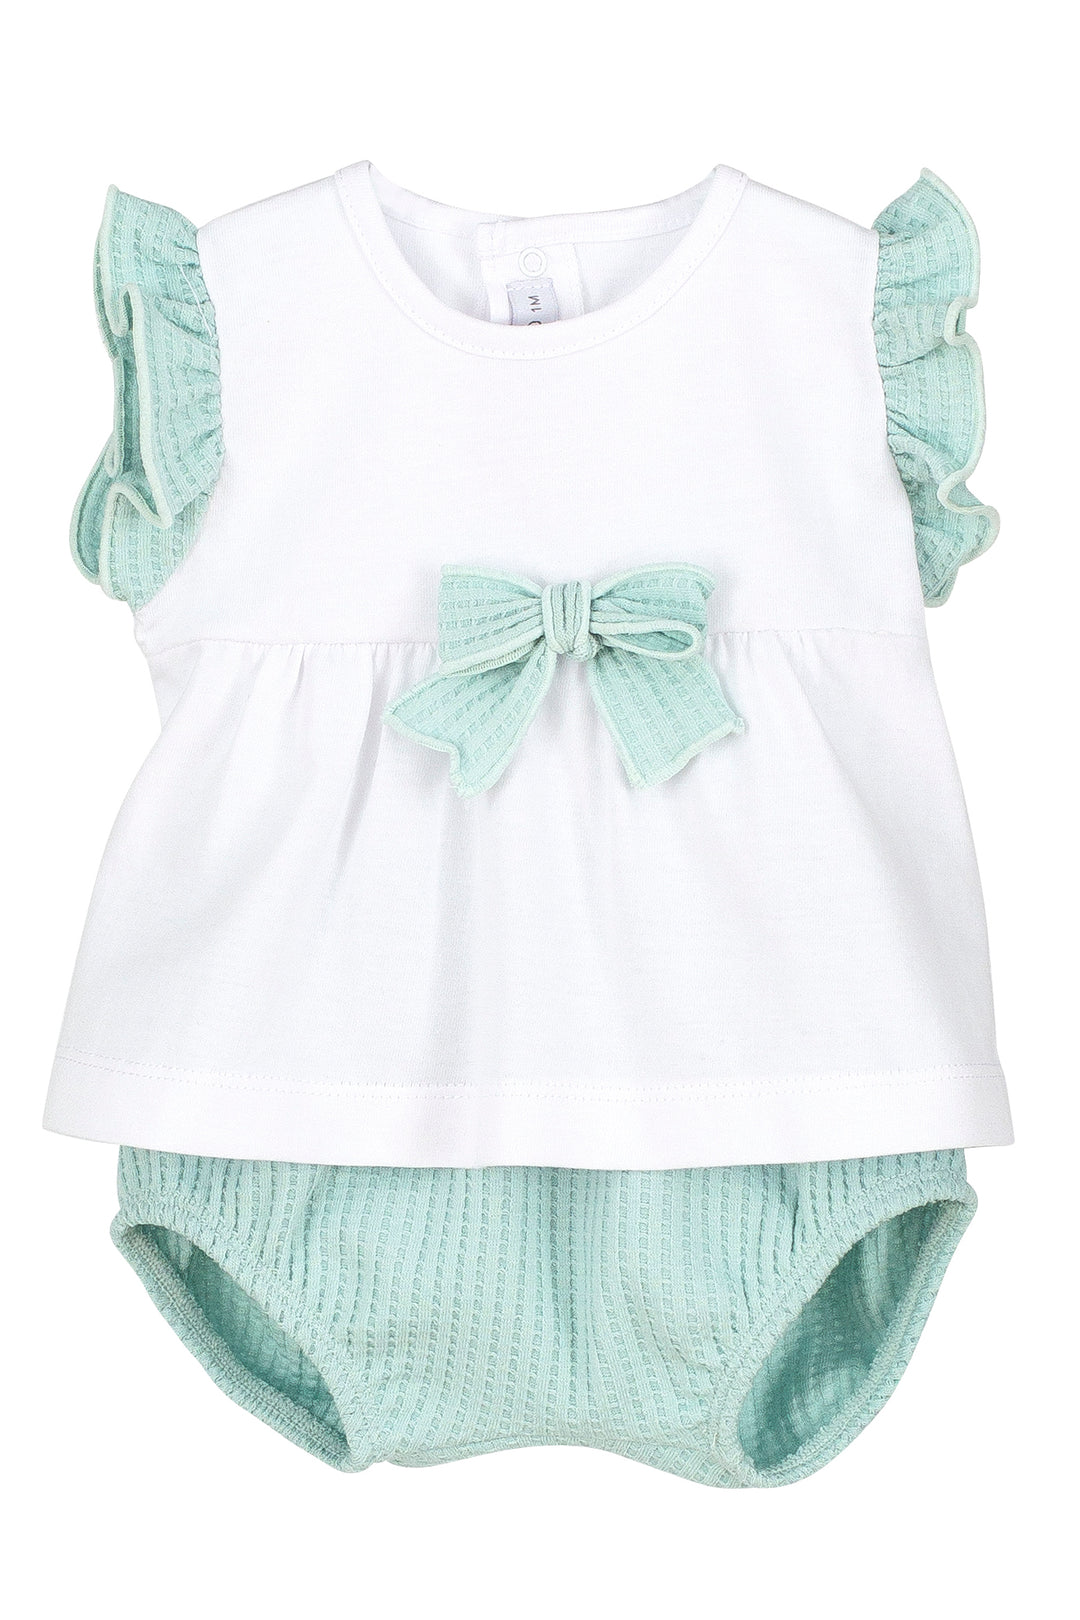 Calamaro "Zoey" Mint Blouse & Bloomers | Millie and John